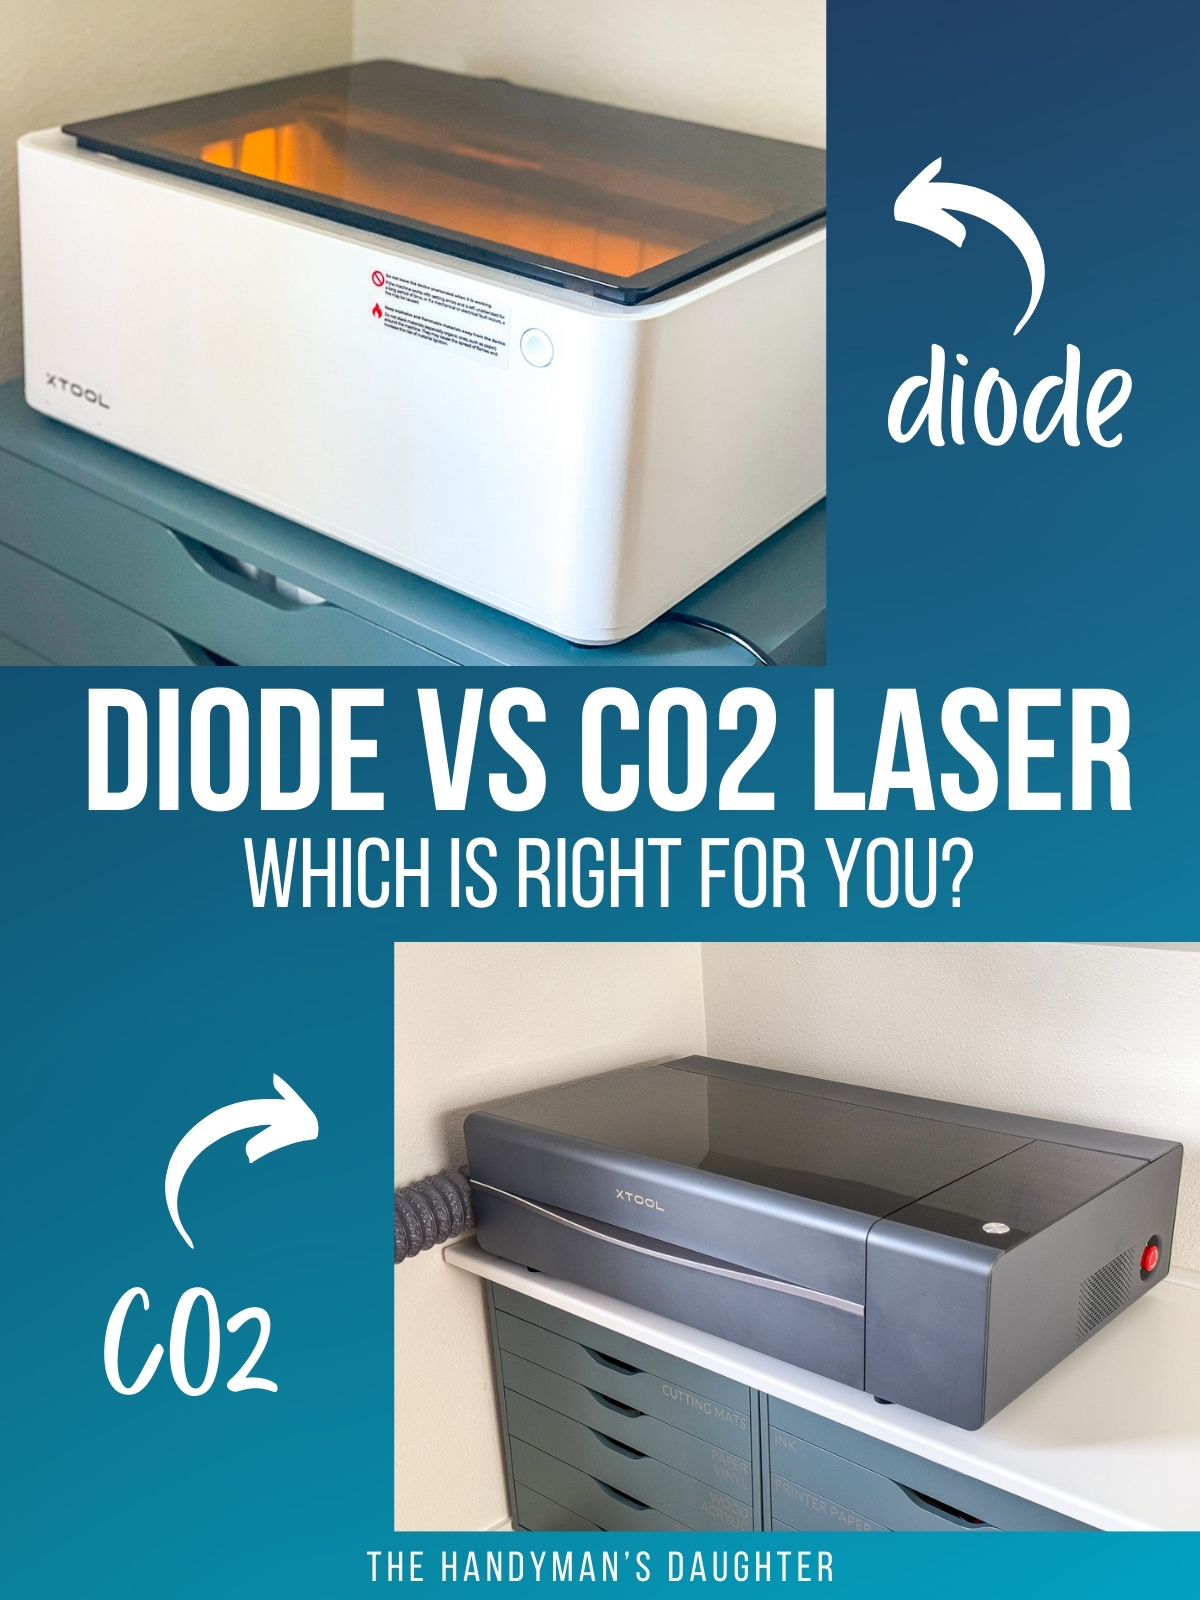 test overlay reading "diode vs co2 laser - which is right for you?" with arrows pointing to each type of machine